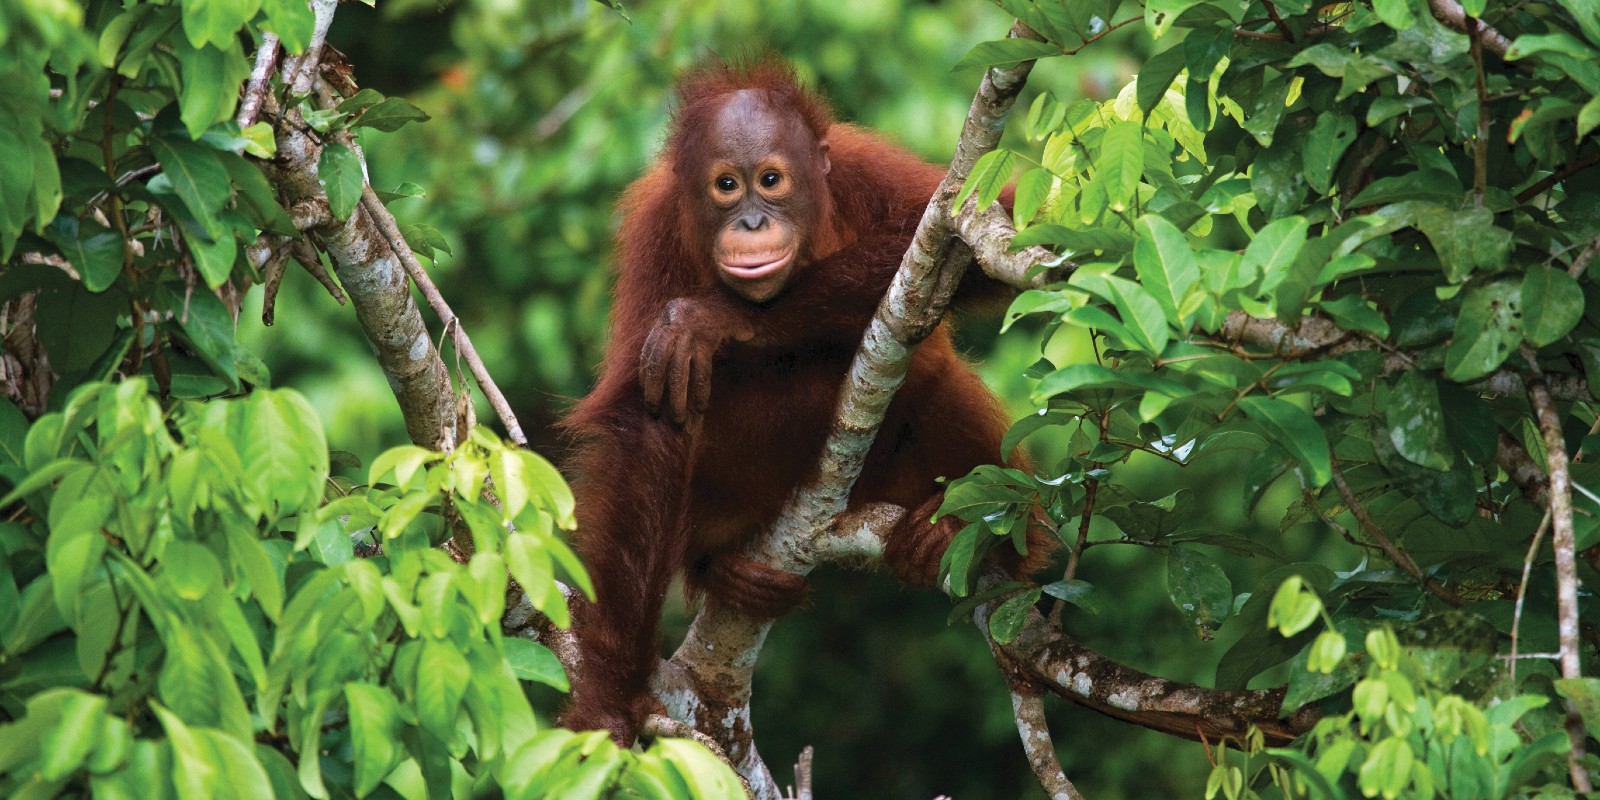 A photo of a young orangutan sitting in a tree.